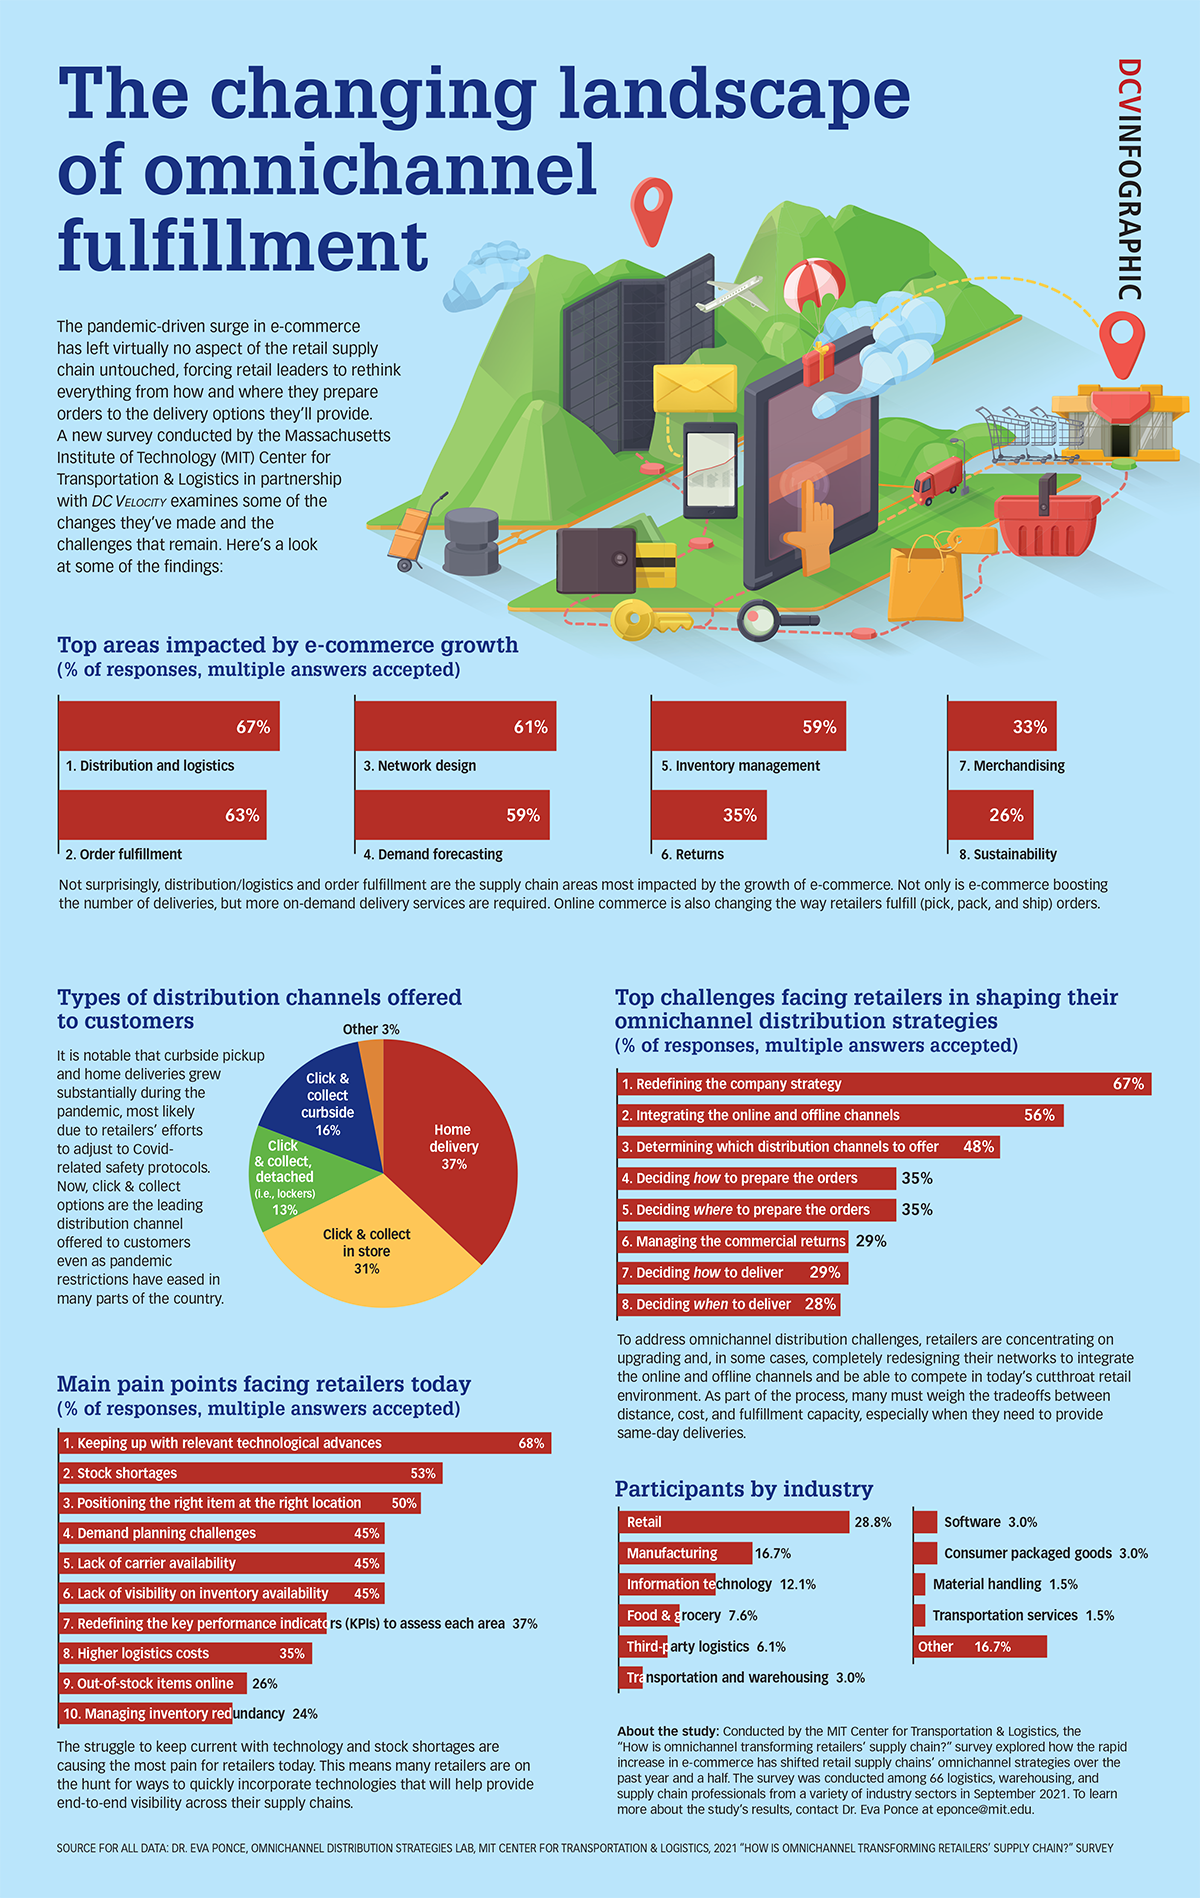 Infographic: MIT Center for Transportation & Logistics' “How is omnichannel transforming retailers’ supply chain?” study